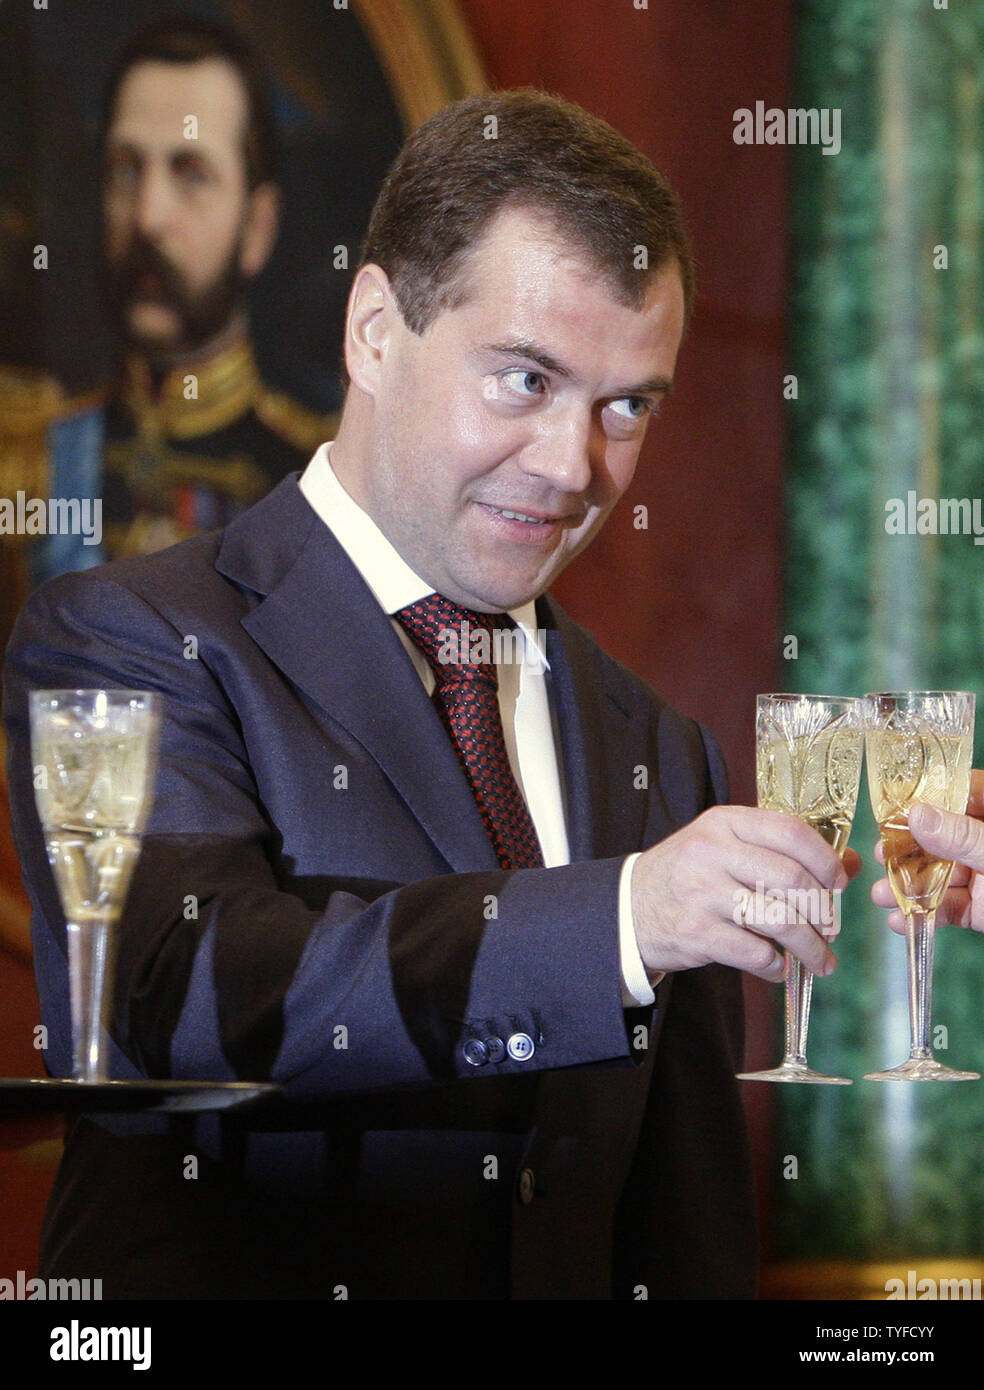 Russian President Dmitry Medvedev toasts after a meeting with Vietnamese counterpart Nguyen Minh Triet in the Kremlin in Moscow on October 27, 2008. Russia and Vietnam agreed Monday to boost their energy cooperation and explore new prospective oil fields.(UPI Photo/Anatoli Zhdanov) Stock Photo